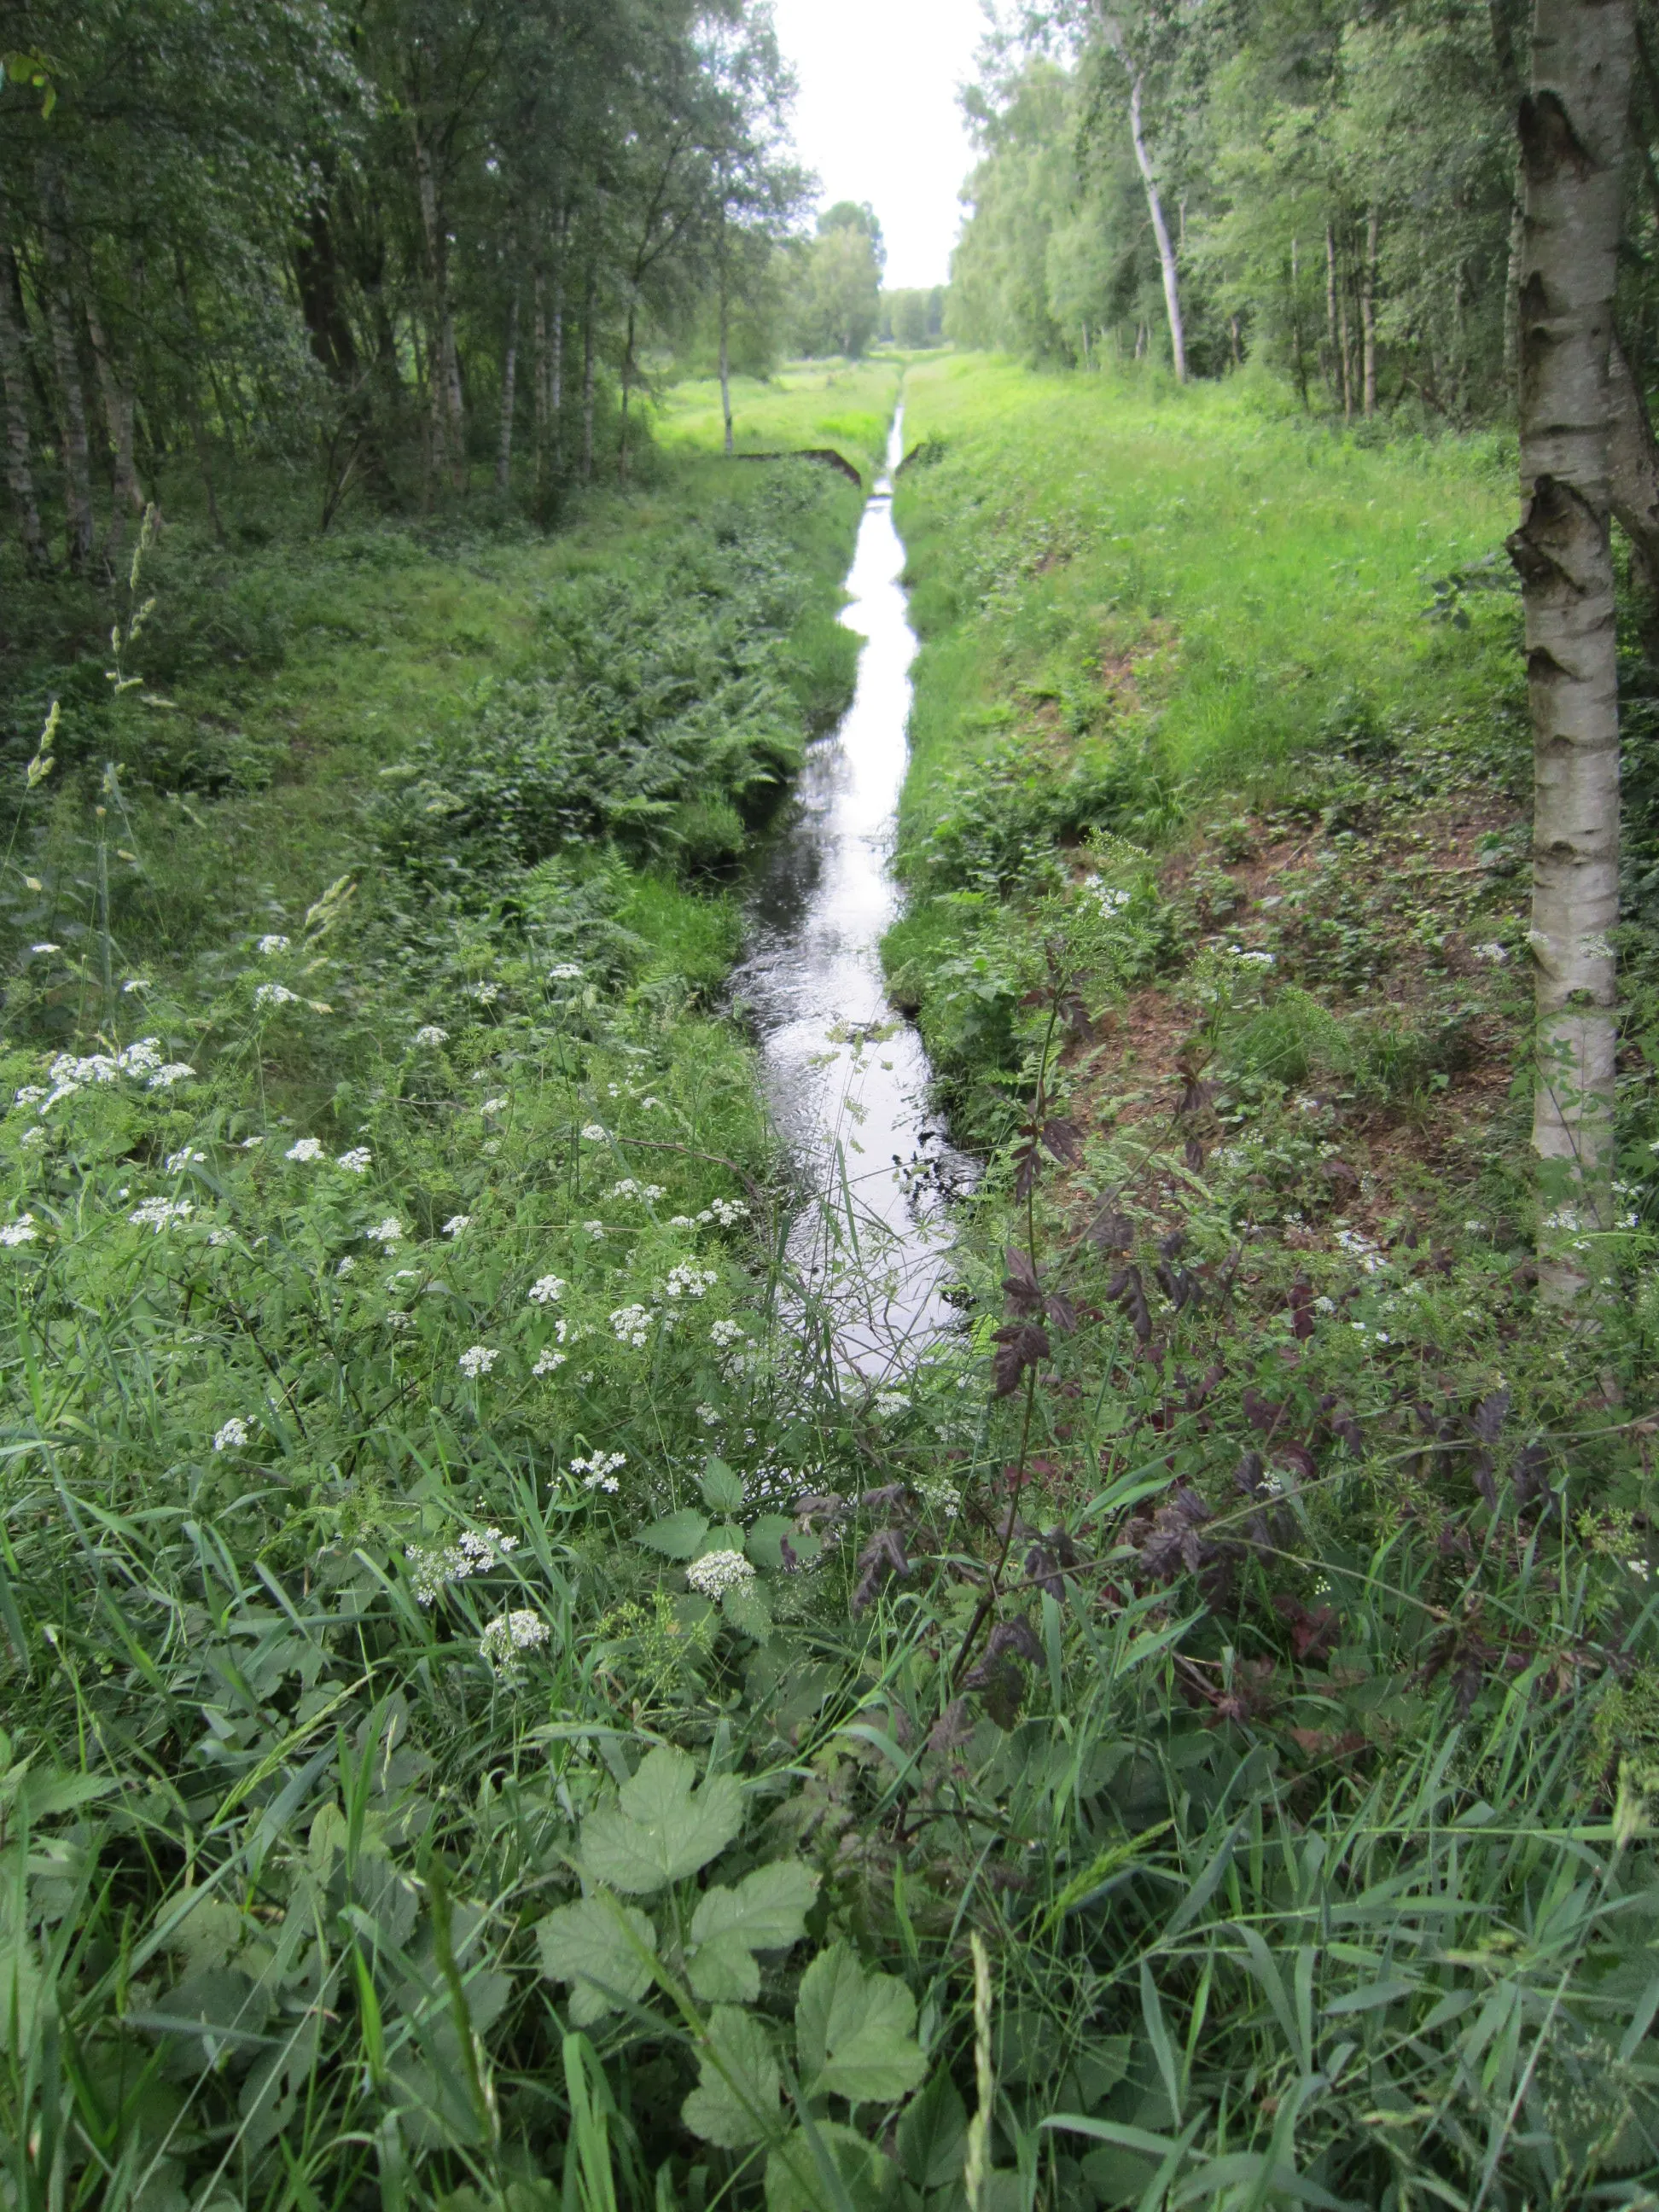 Photo showing: Creek "Dadau" north of the road between Lohne and Diepholz in Lower Saxony. On the left: Landkreis Vechta; on the right: Landkreis Diepholz